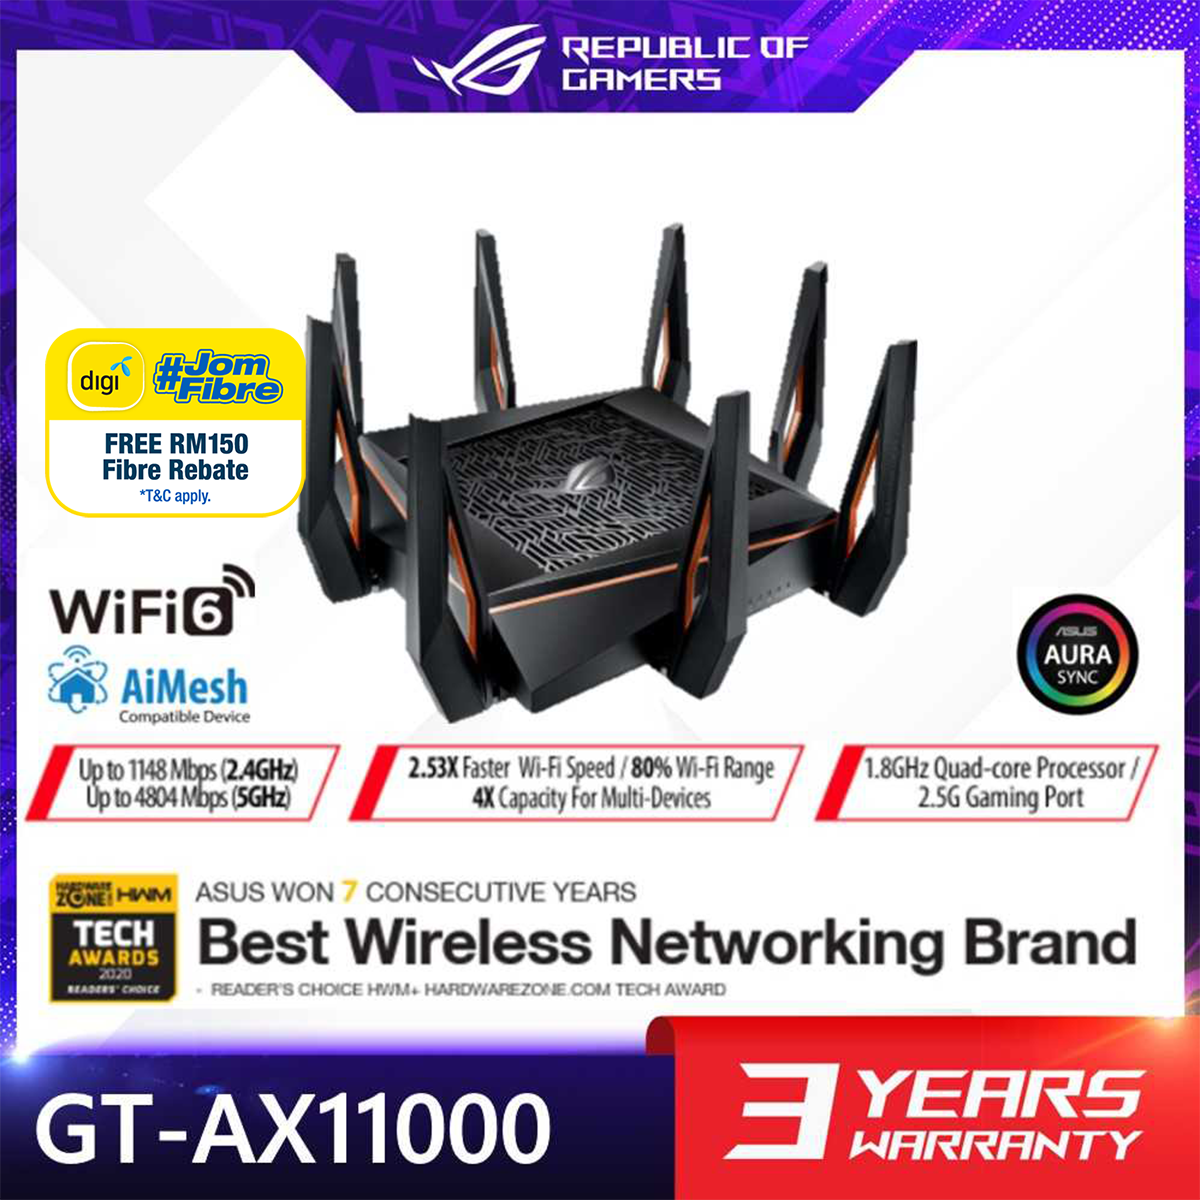 Asus GT-AX11000 ROG Rapture Tri-Band Wireless AX WiFi Router ( AX11000+ROG CAT7 3M)